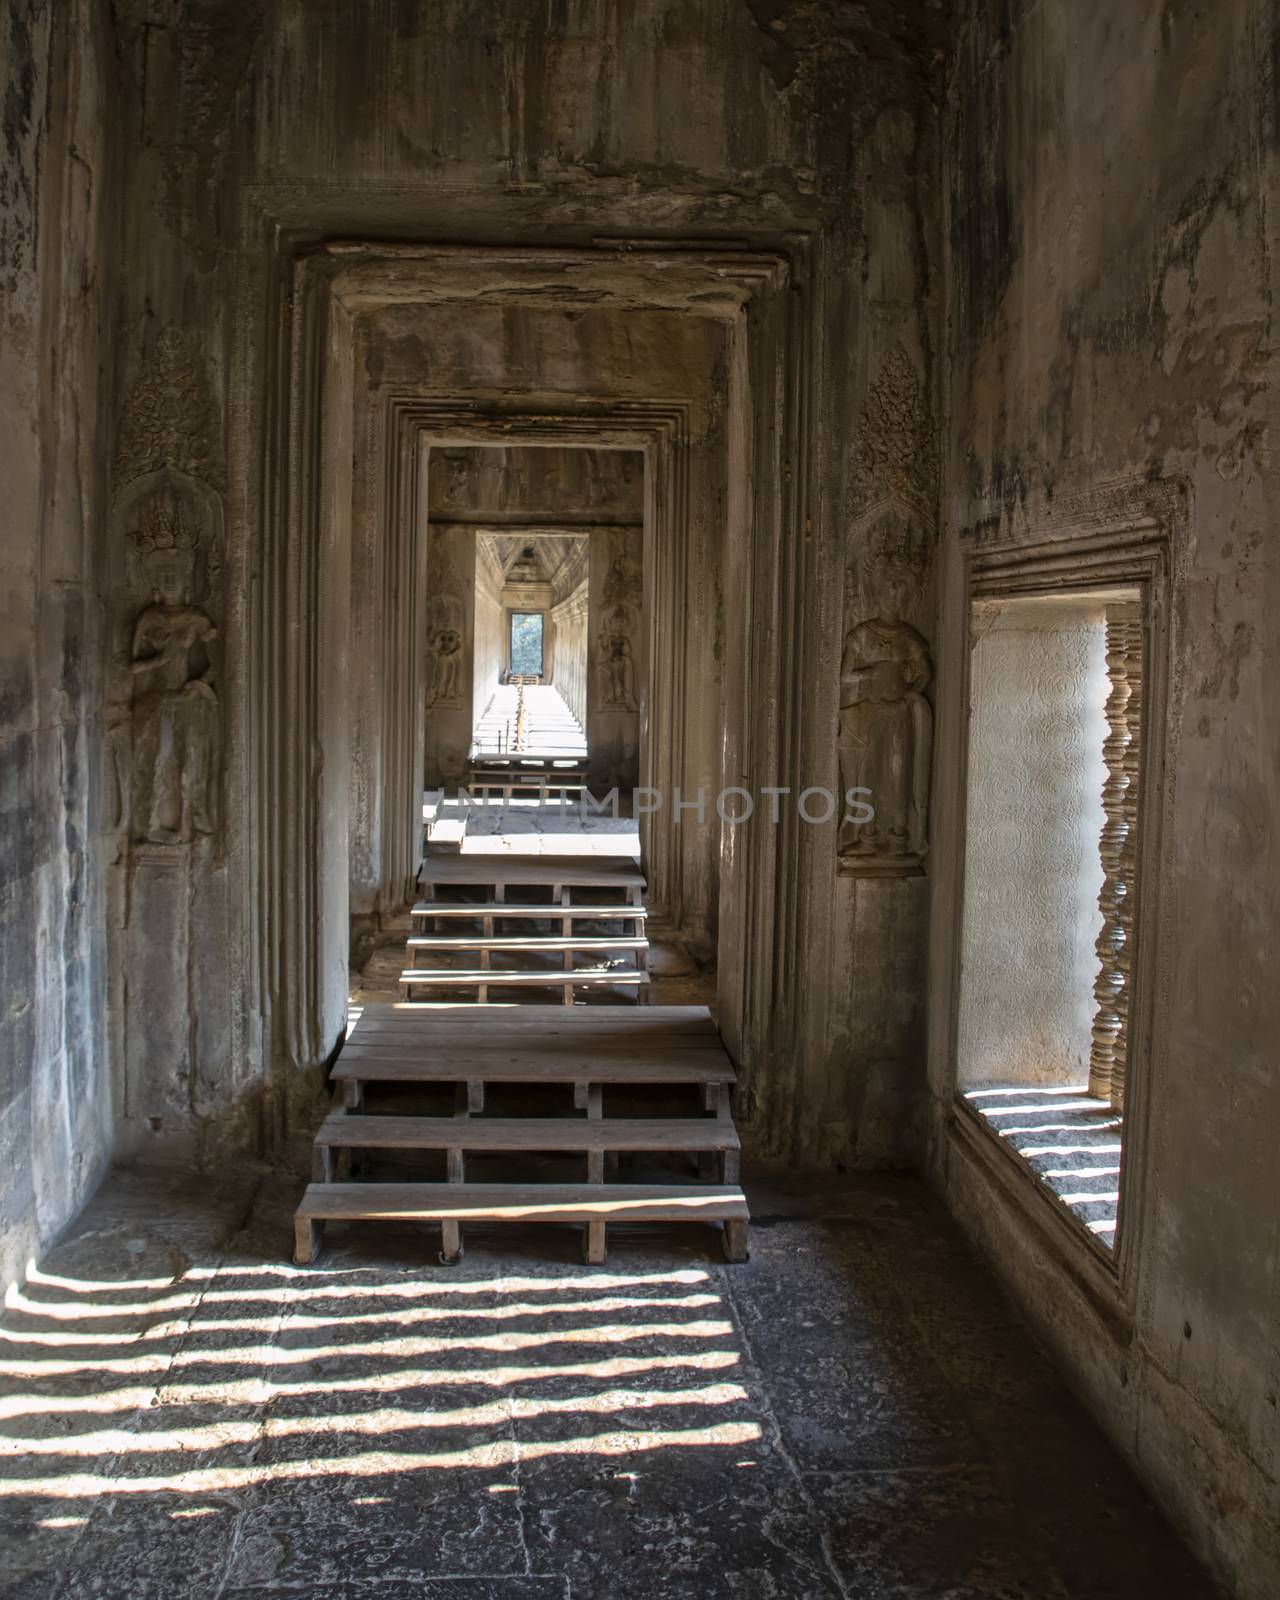 Angkor Wat, Cambodia - March 2016: View along a corridor at Angkor wat. Originally constructed in the early 12th century, the ruins are a huge tourist attraction as well as a place of worship today